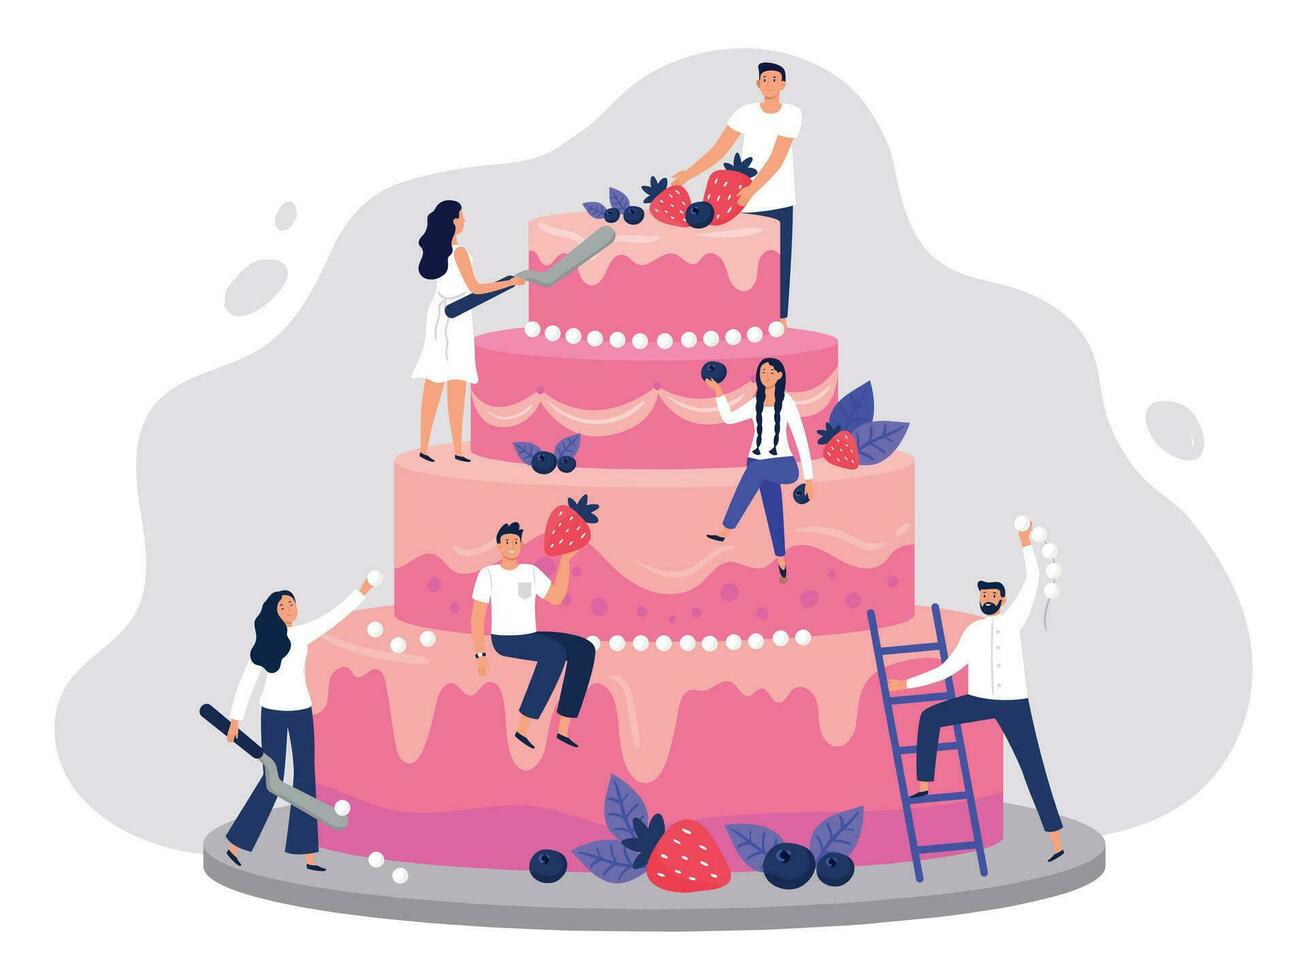 Wedding cake. Bakers decorate pink wedding cake, people cooking together and sweet dessert with berries vector illustration